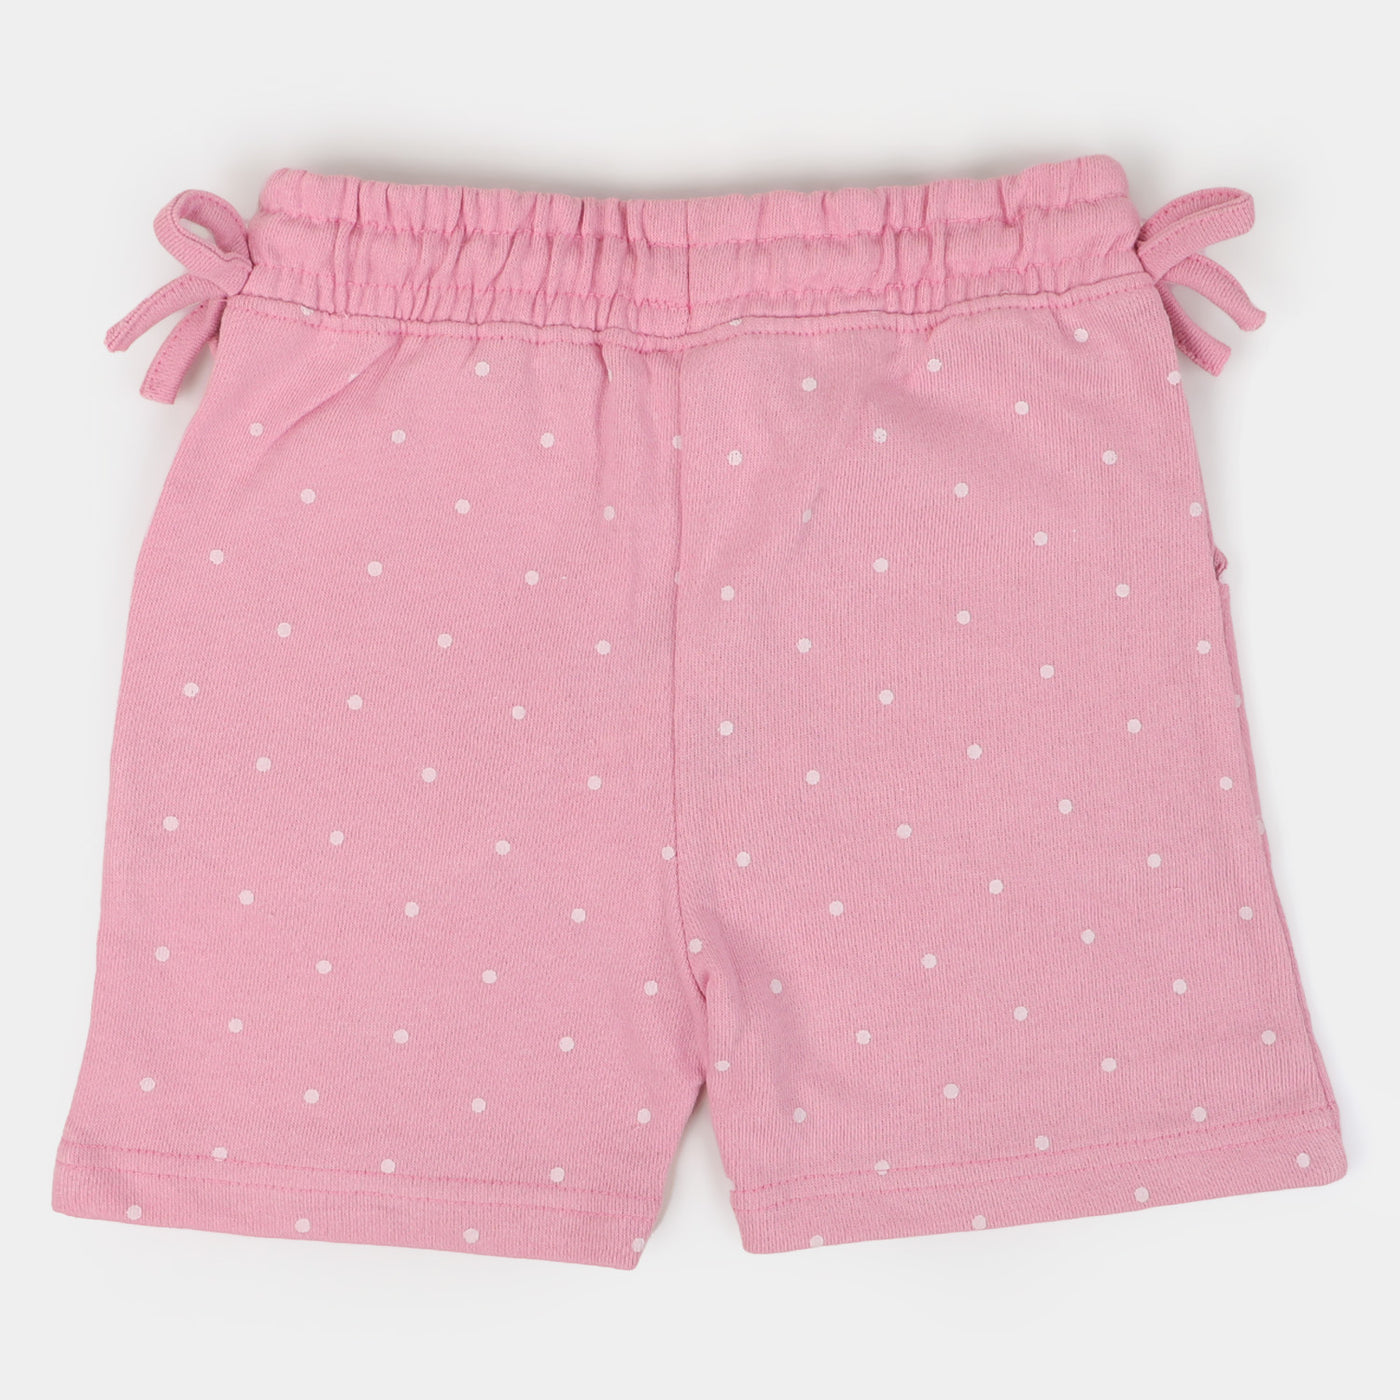 Girls Cotton Short Character - Baby Pink